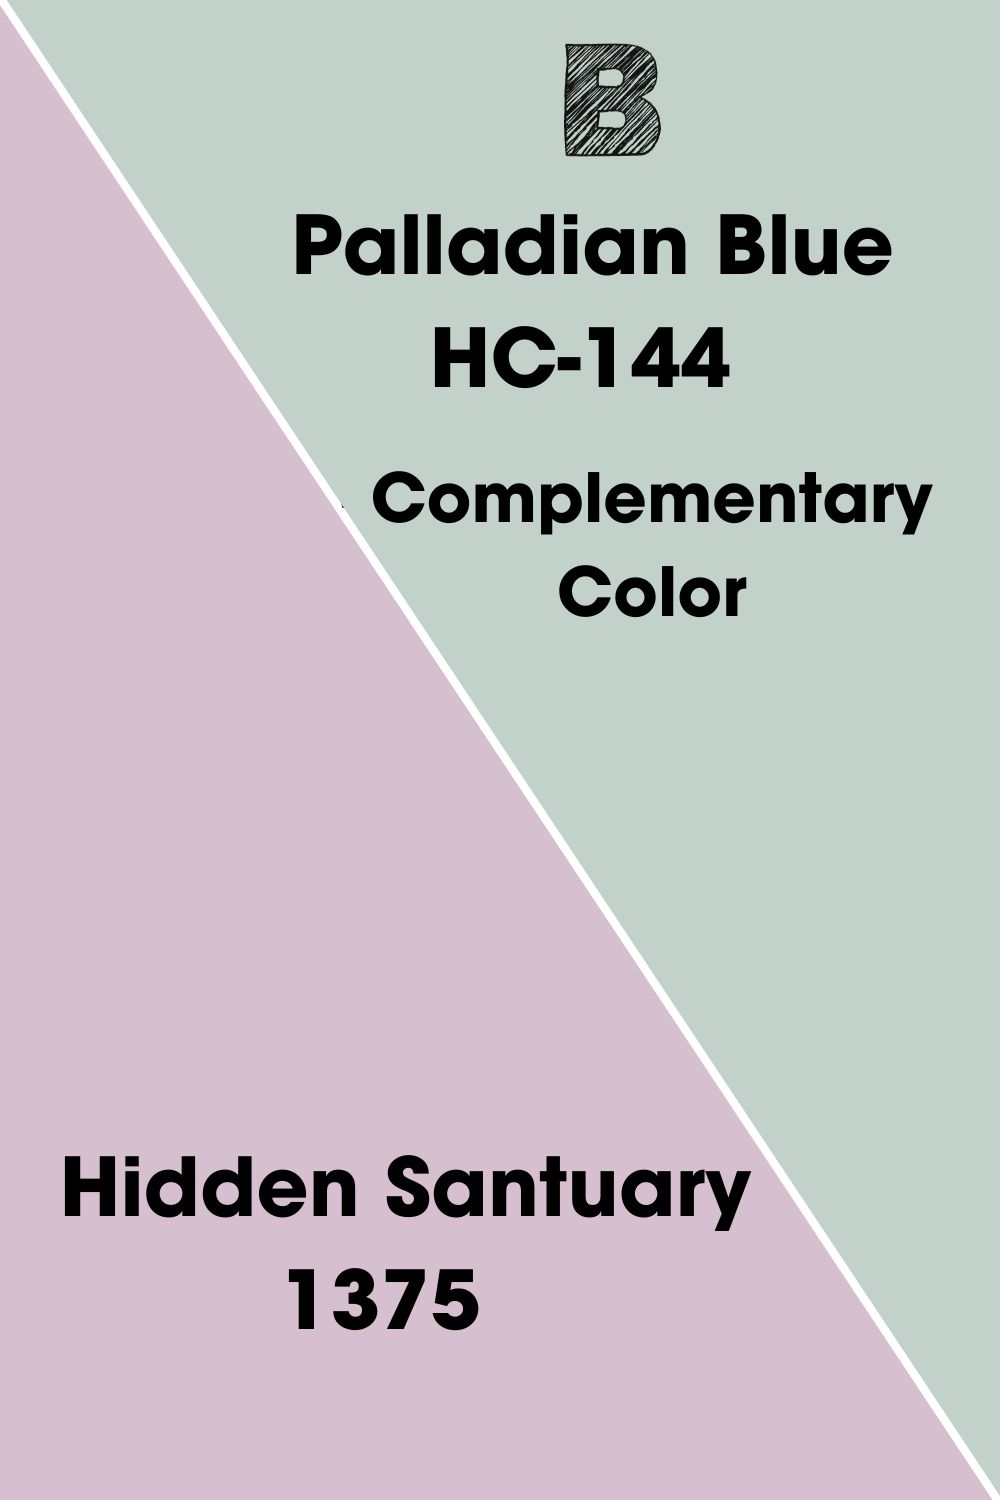 Palladian Blue’s Complementary Color